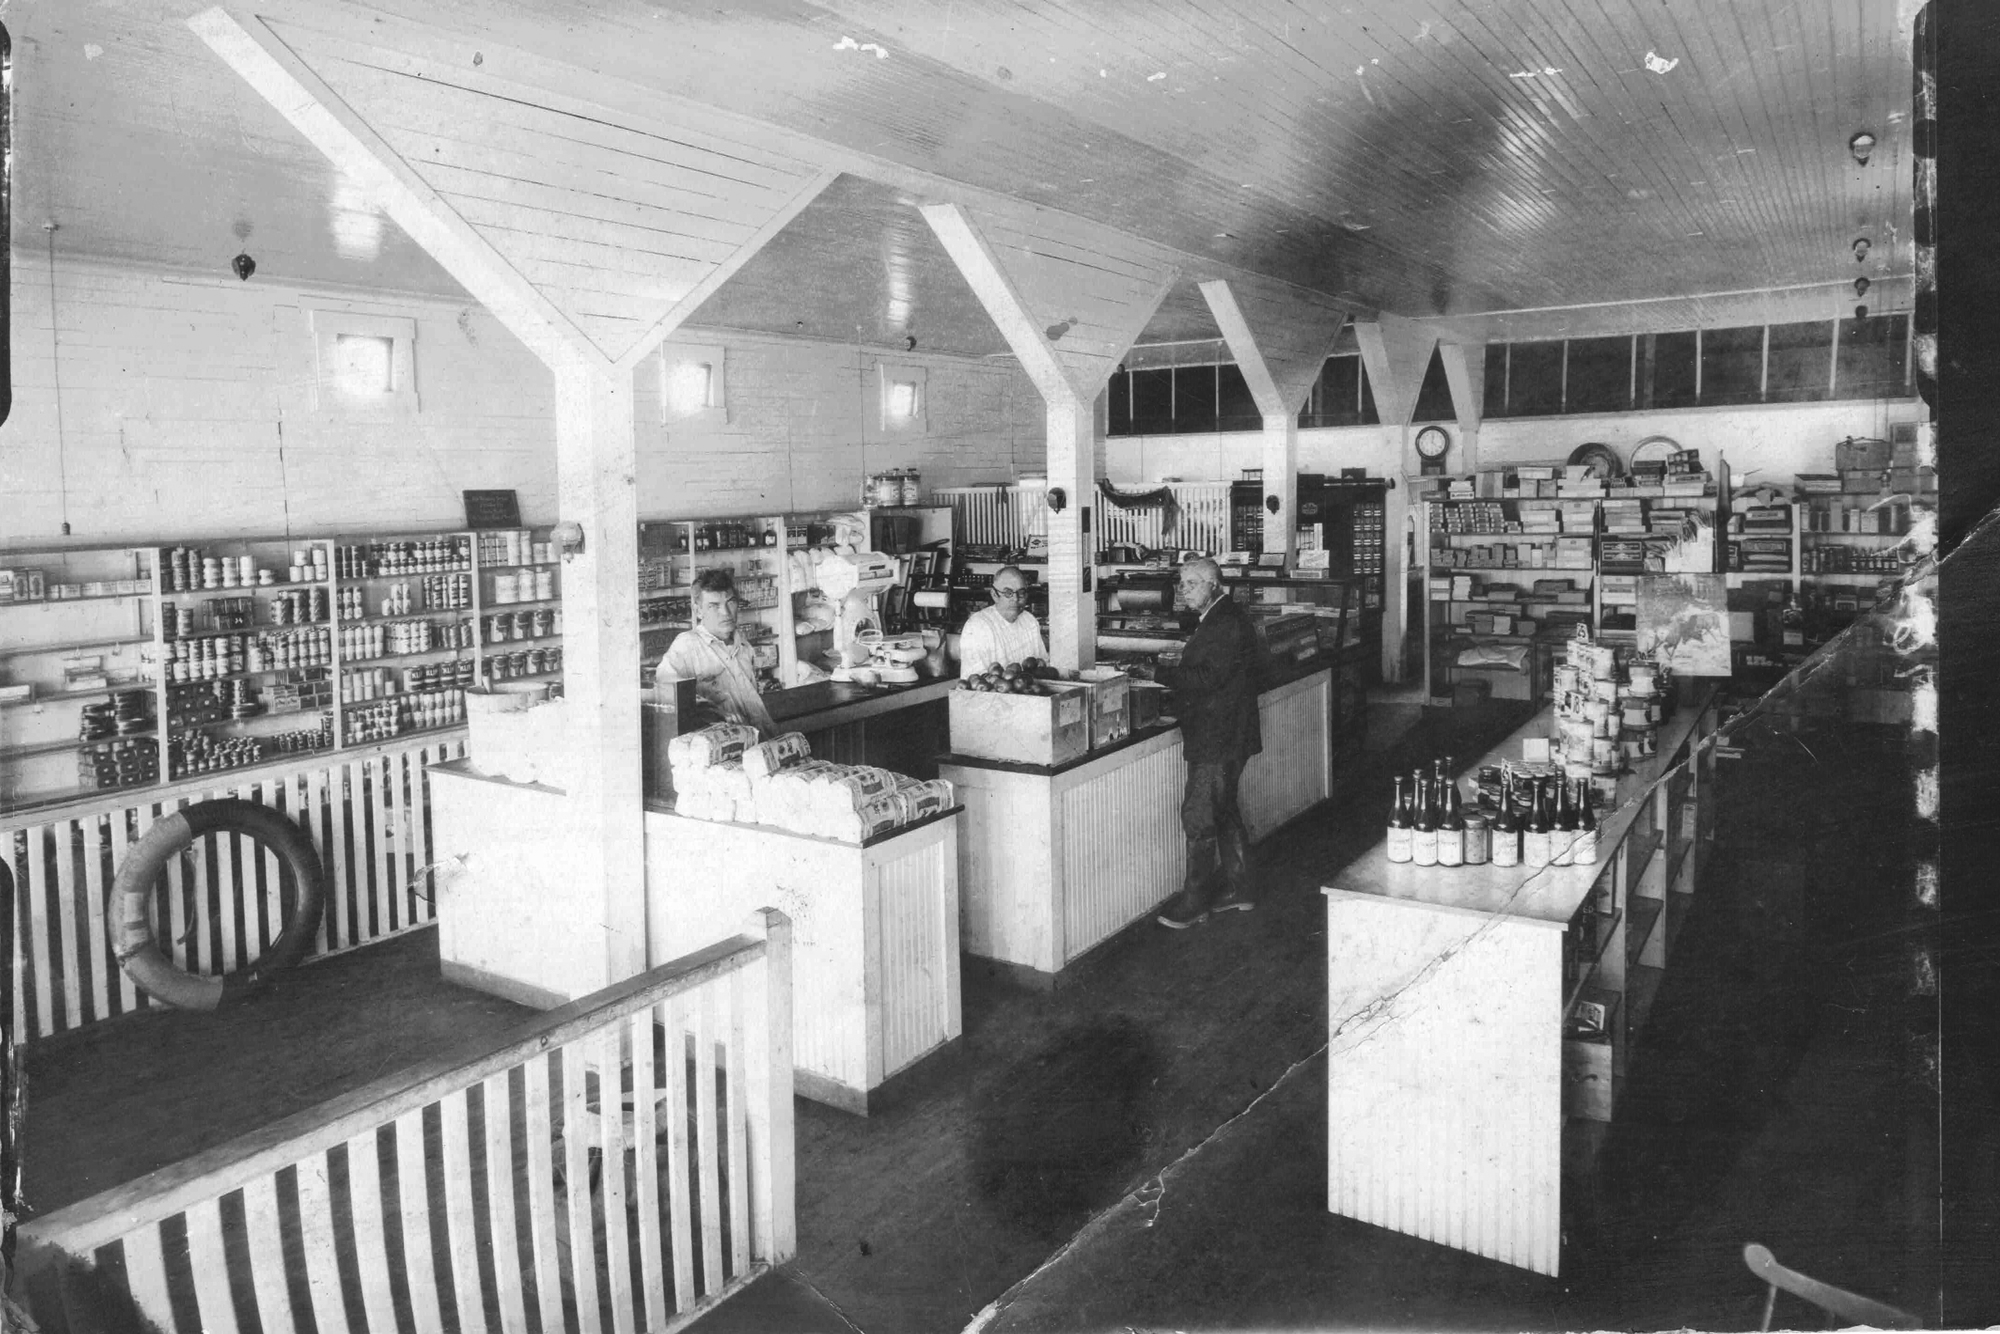 The Beck family started its construction enterprise by building its own general stores in Glades and Hendry counties after arriving there from Ohio in the early 1900s. Courtesy Beck Companies